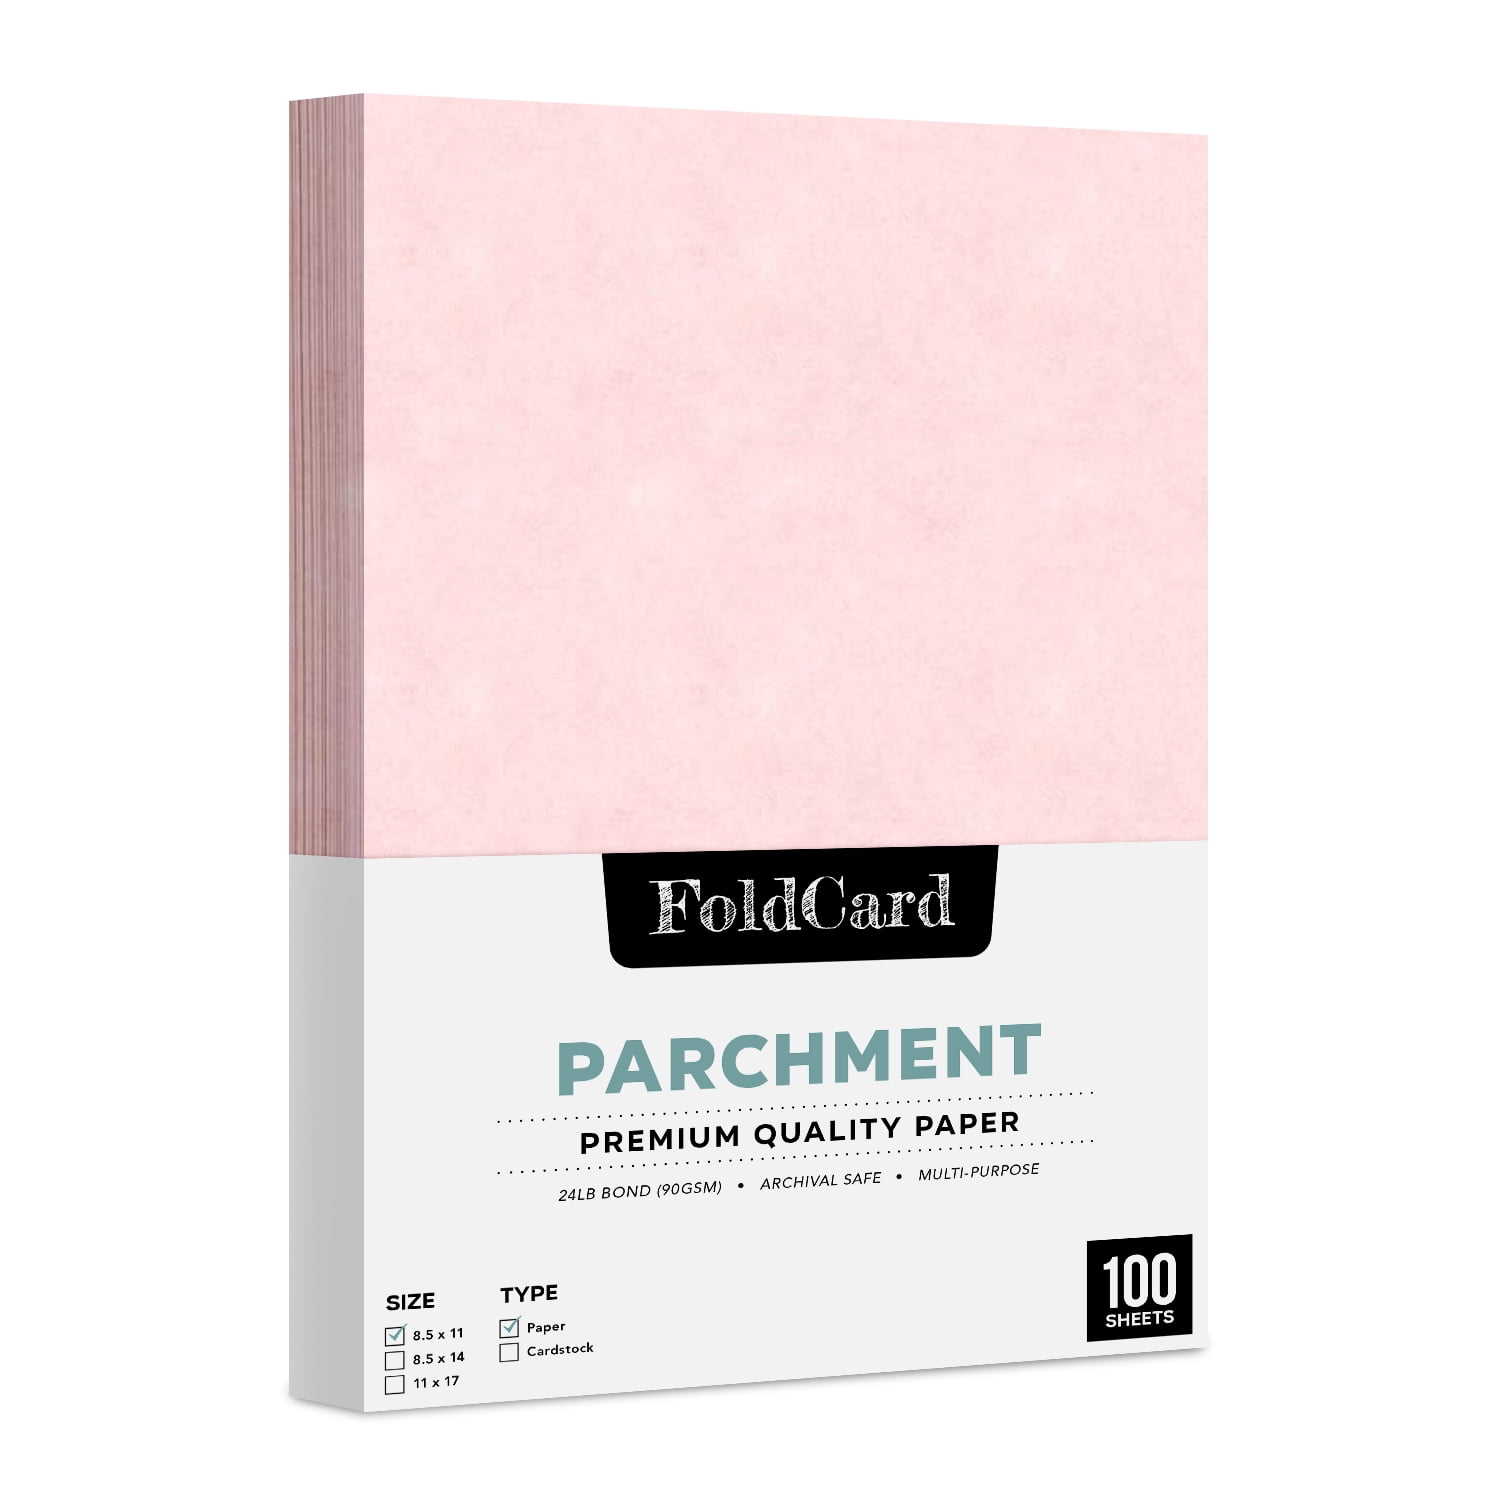 S Superfine Printing Pink Stationery Parchment Paper, A4-8.3 x 11.7, 60lb  / 90gsm Text 50 Sheets